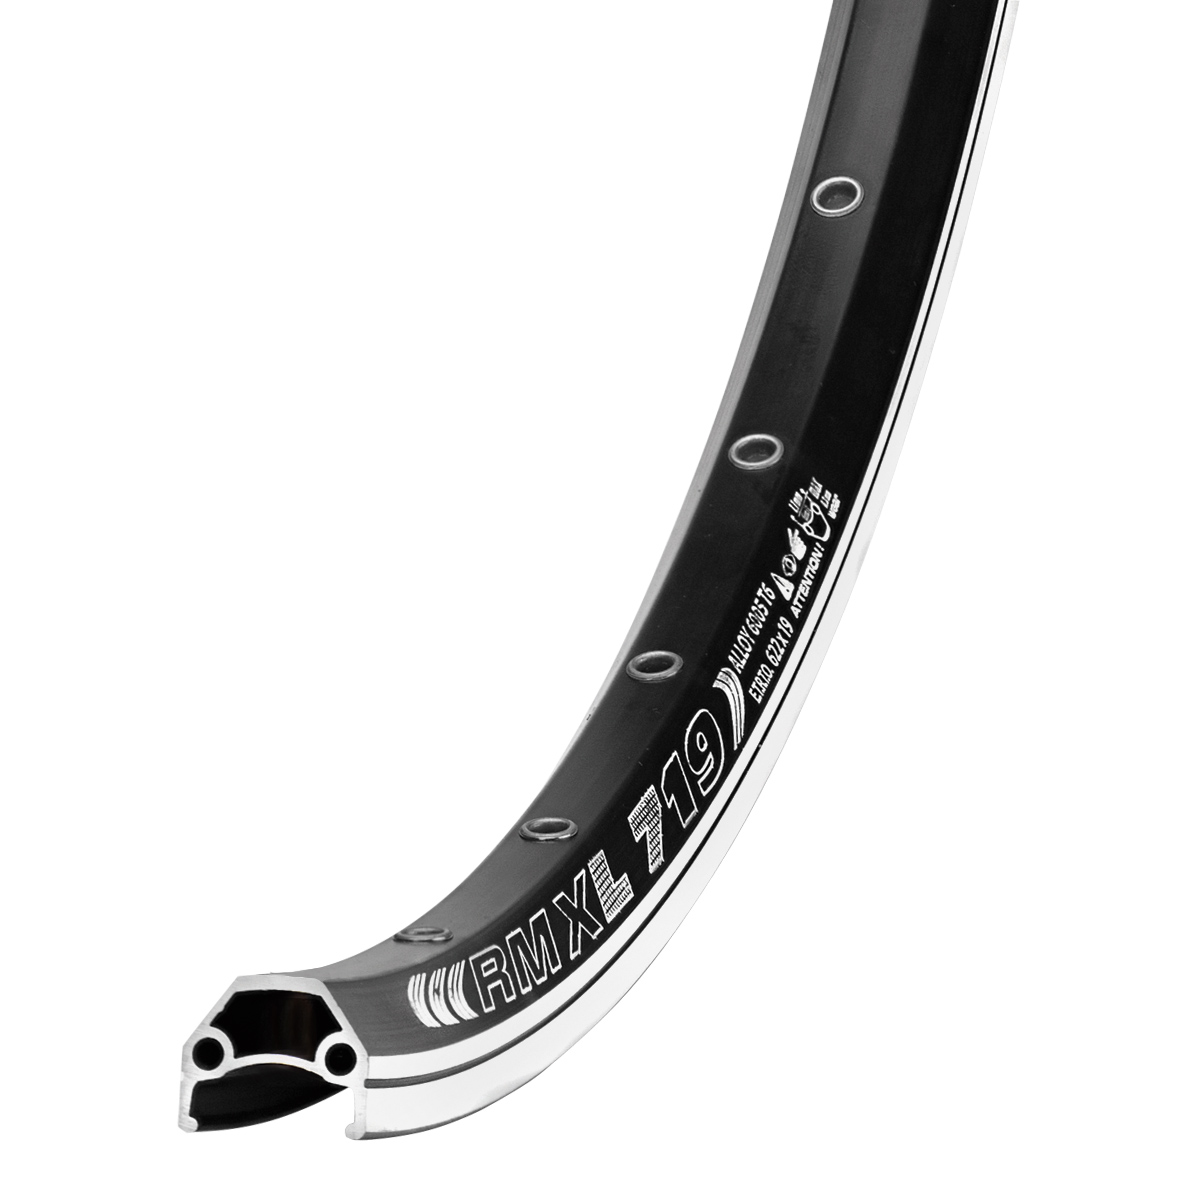 380330 REMERX Dragon L-719 26″ hollow rim – AVAILABLE IN SELECTED BIKE SHOPS